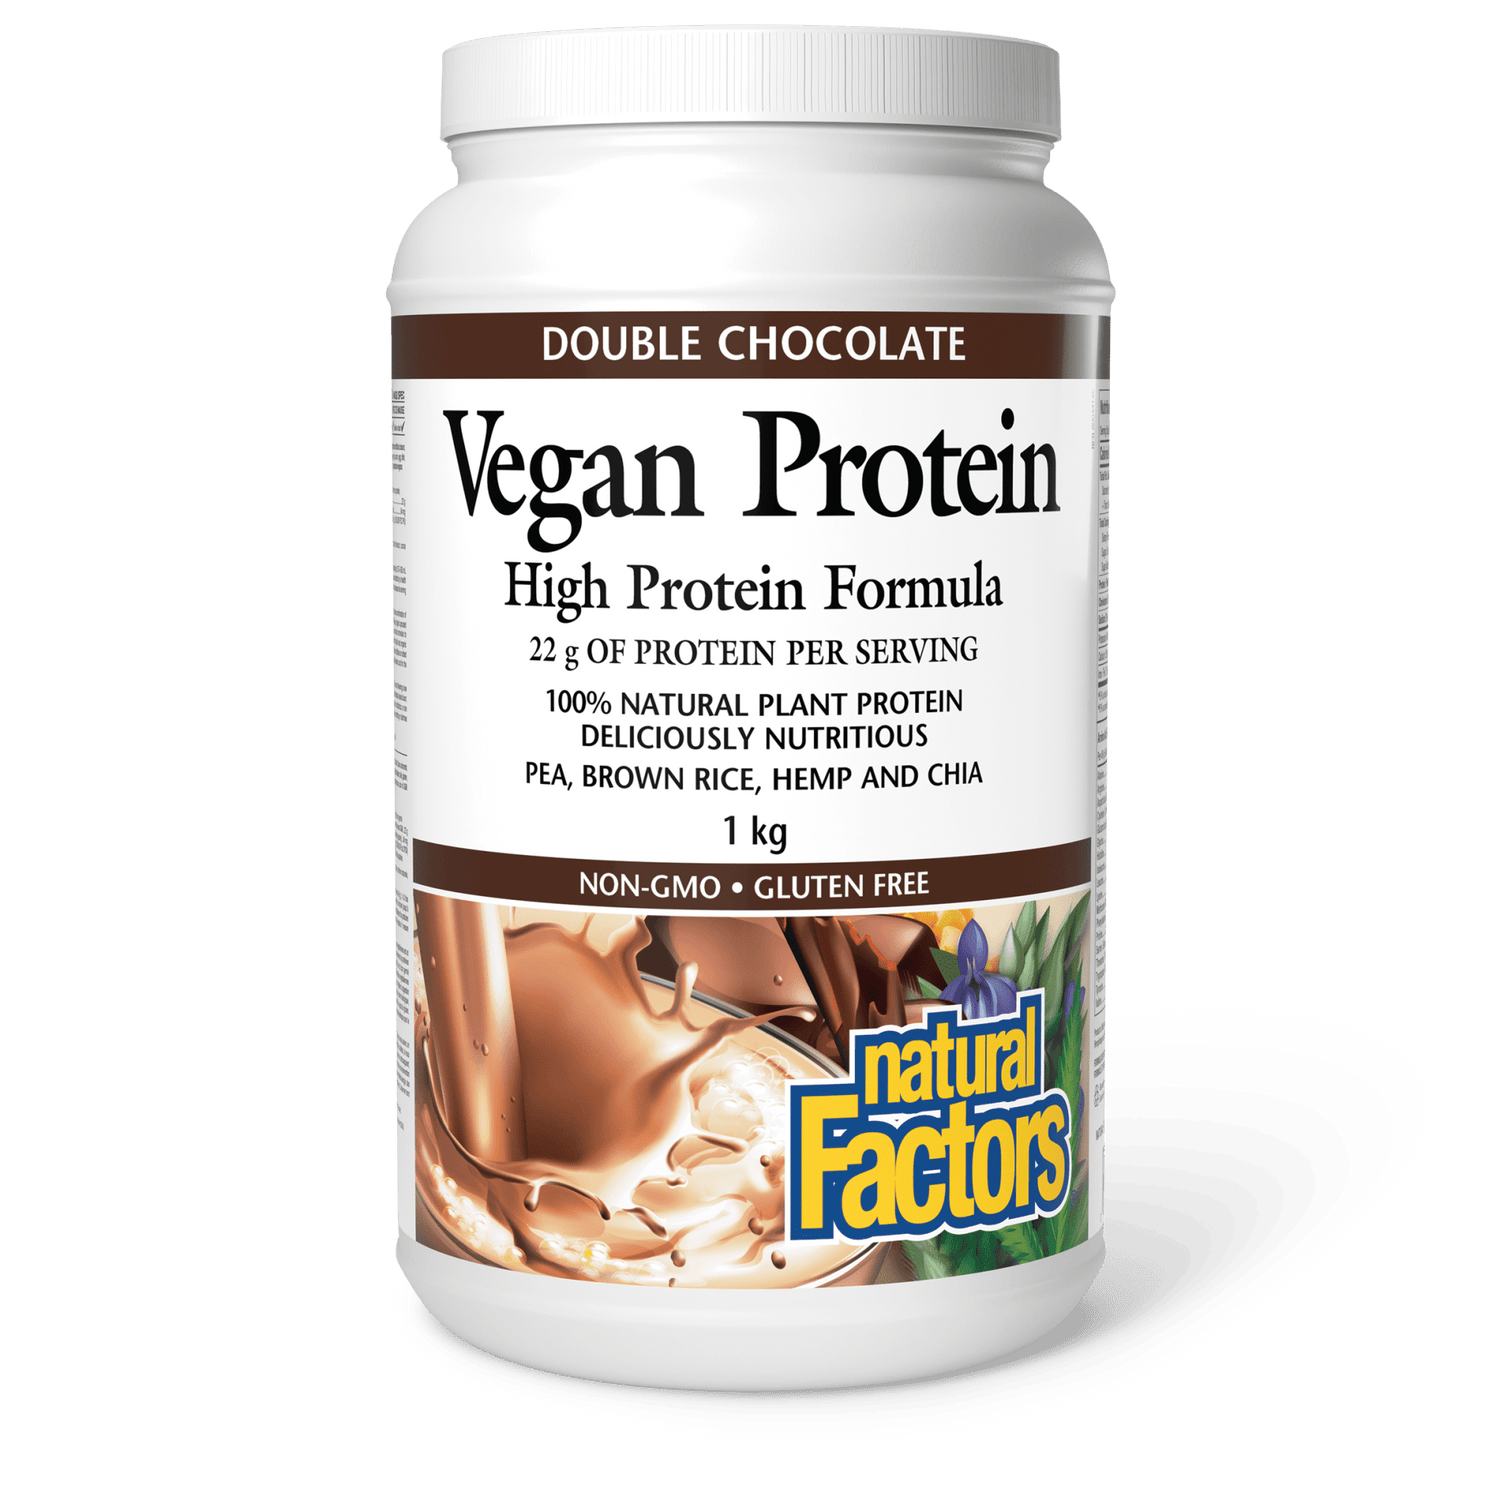 Vegan Protein High Protein Formula, Double Chocolate, Natural Factors|v|image|2924